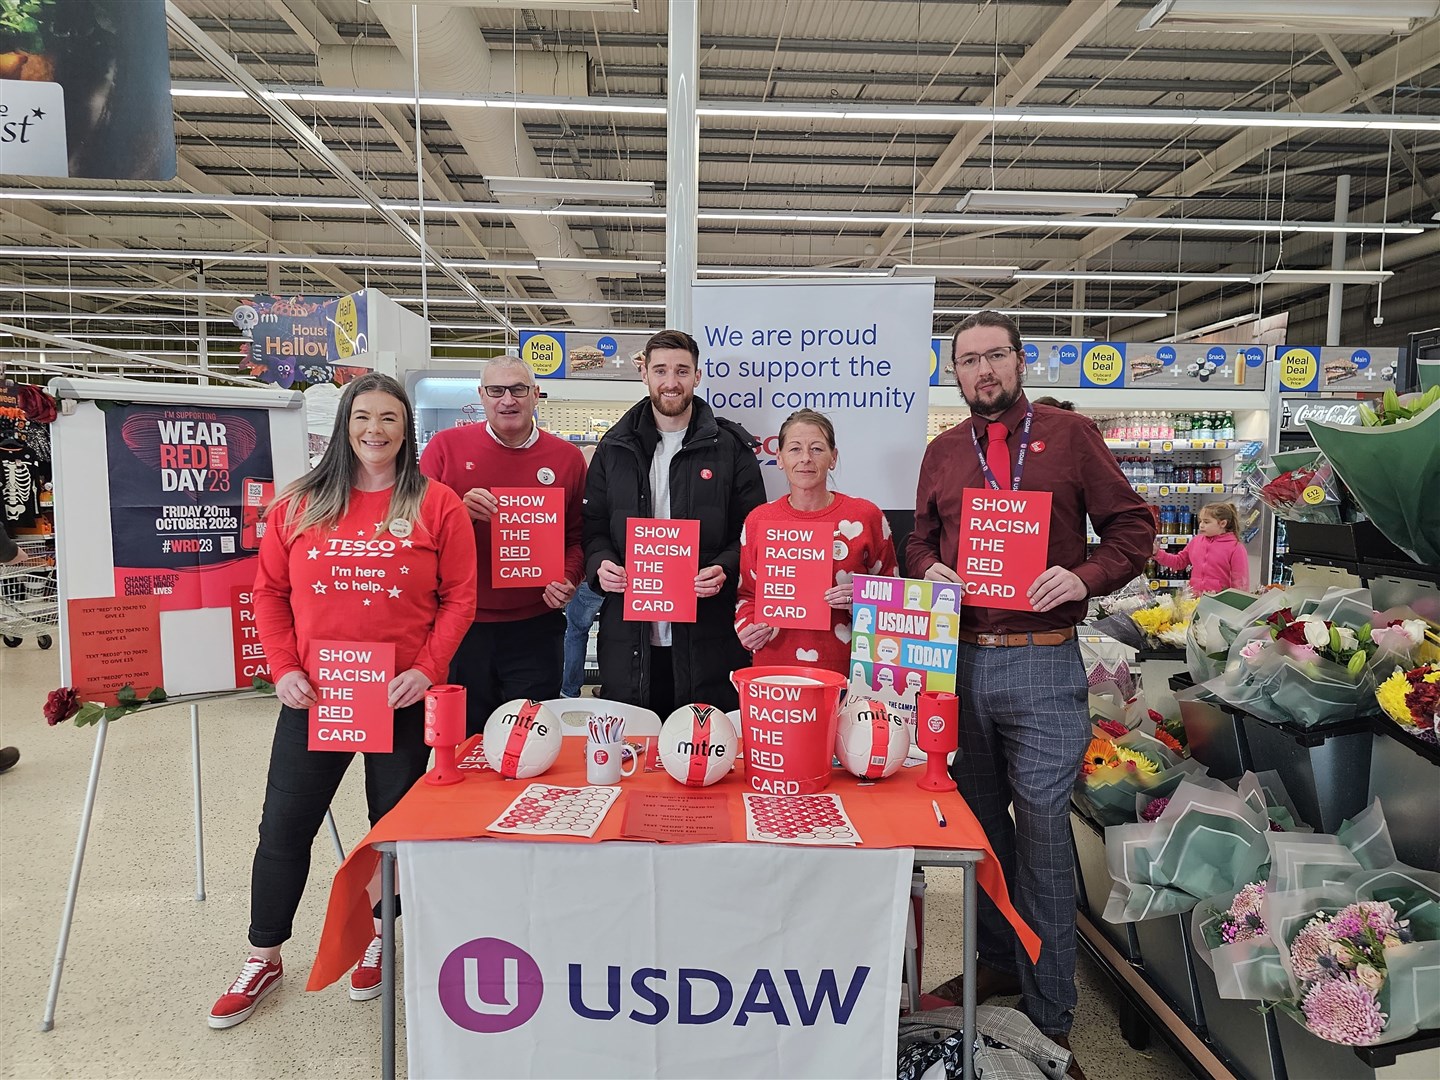 Ross County skipper Jack Baldwin offered his support to the Show Racism the Red Card campaign at Tesco in Dingwall in a team up woth Usdaw.